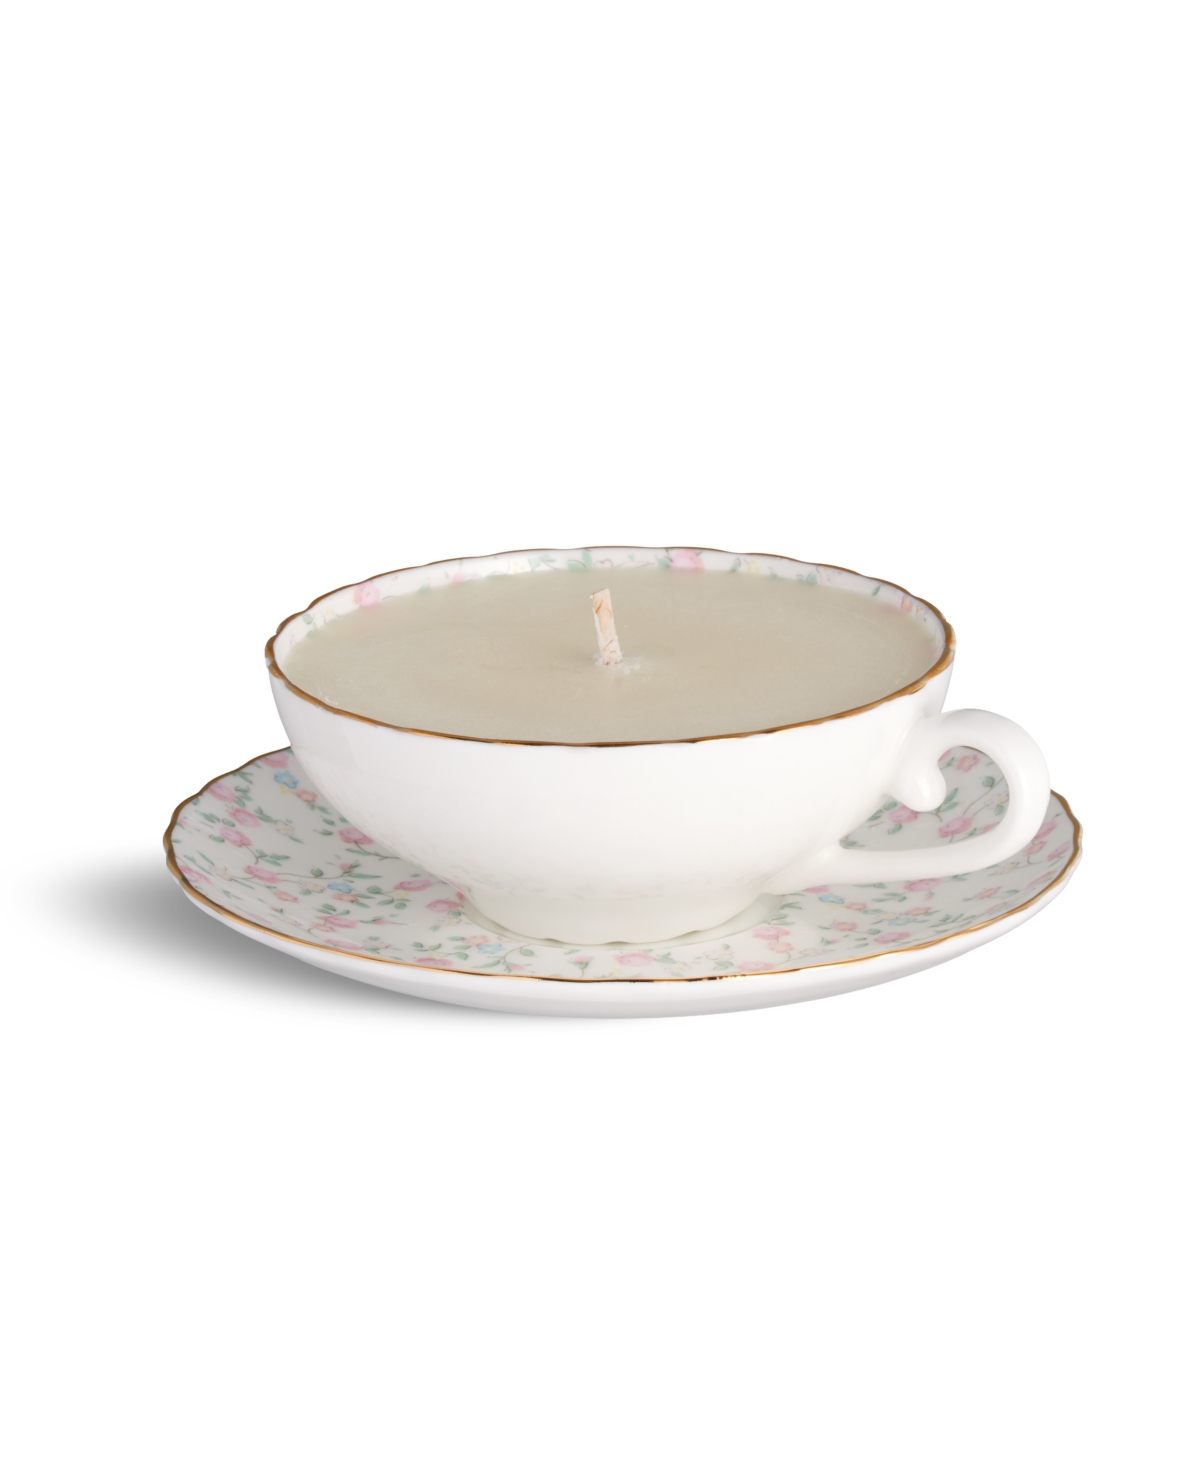 Rice Flower Teacup Candle